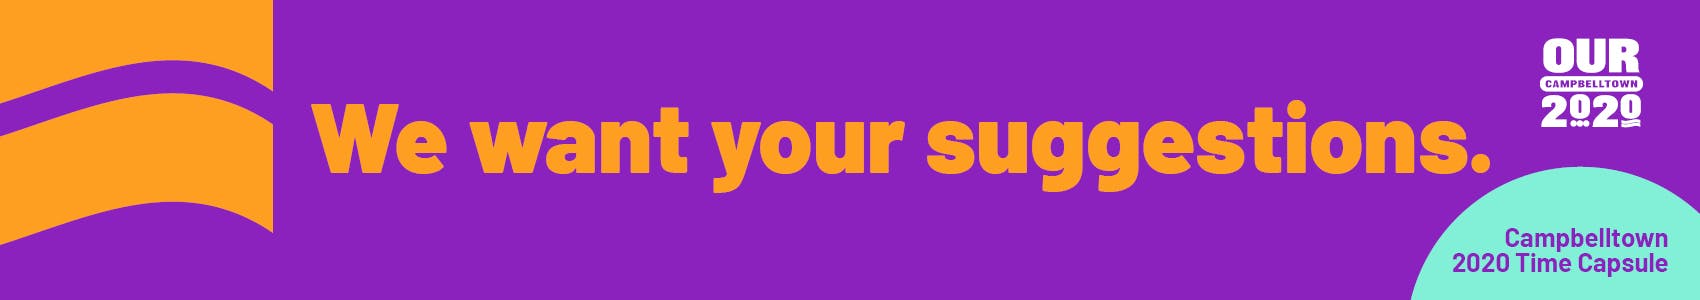 Wording that says 'we want your suggestions' on a purple background